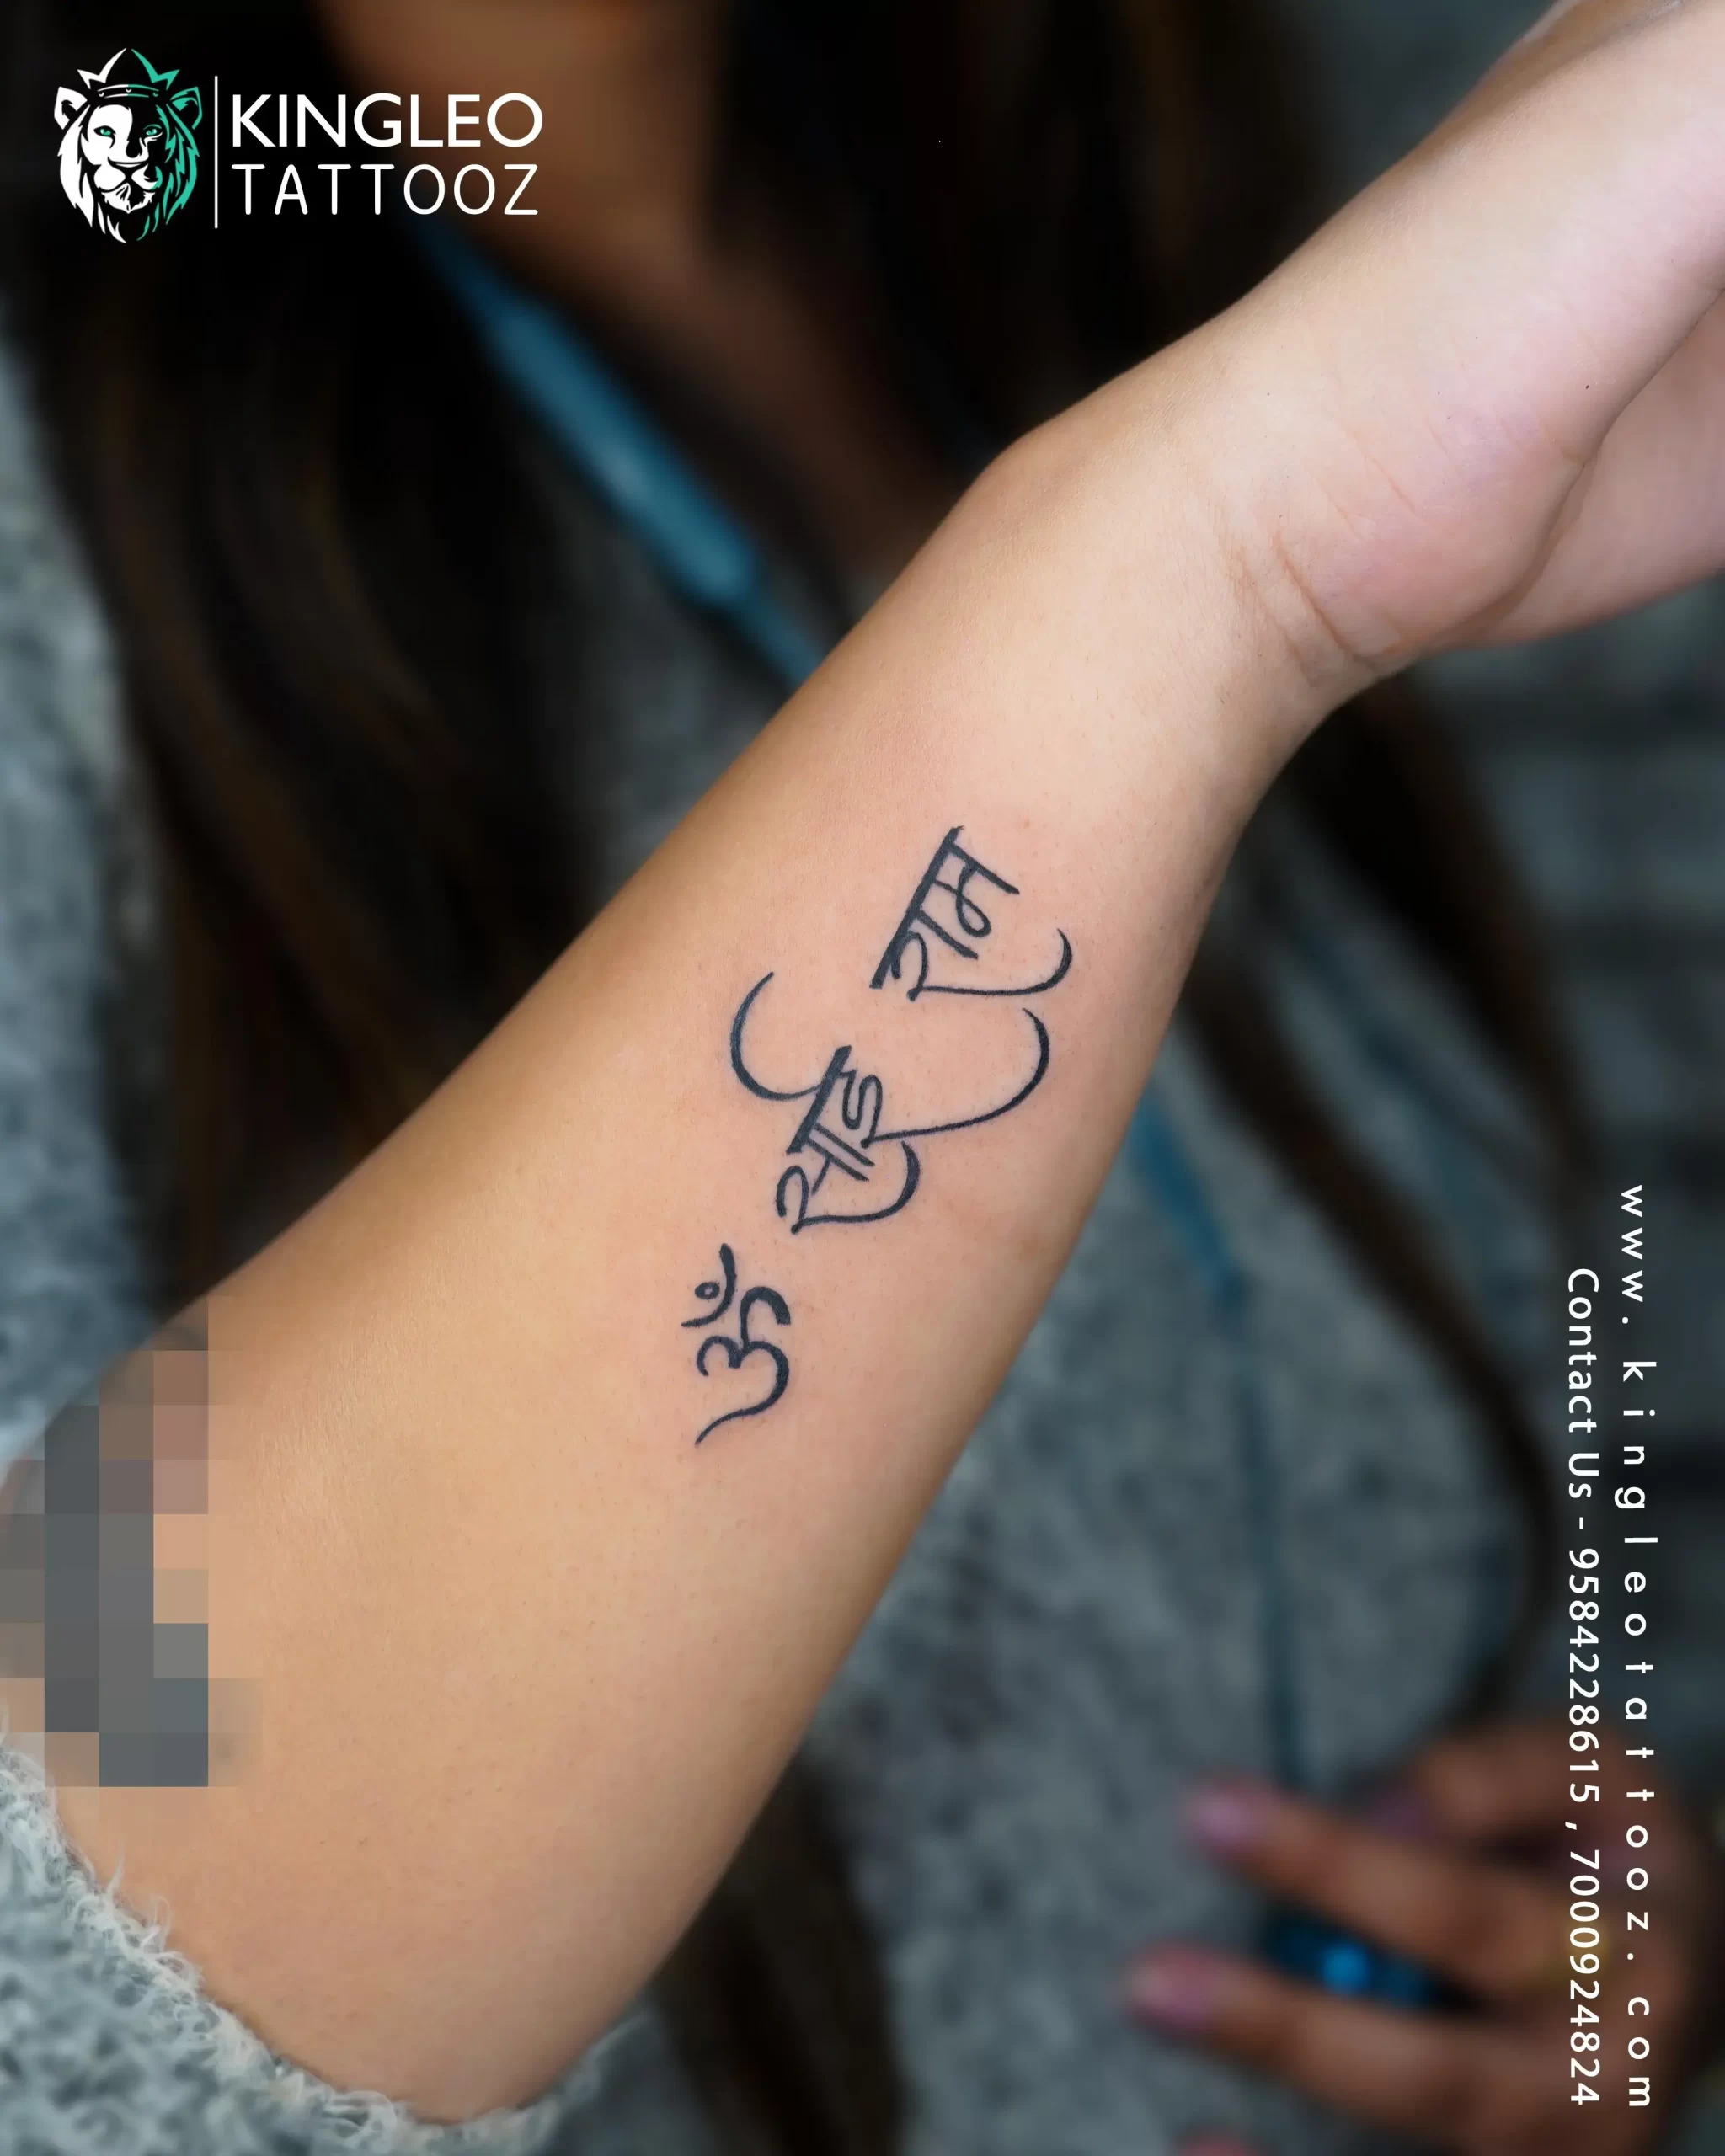 fashionoid Maa Pa Stylish Black Waterproof Temporary Tattoo For Boys Girls  - Price in India, Buy fashionoid Maa Pa Stylish Black Waterproof Temporary  Tattoo For Boys Girls Online In India, Reviews, Ratings